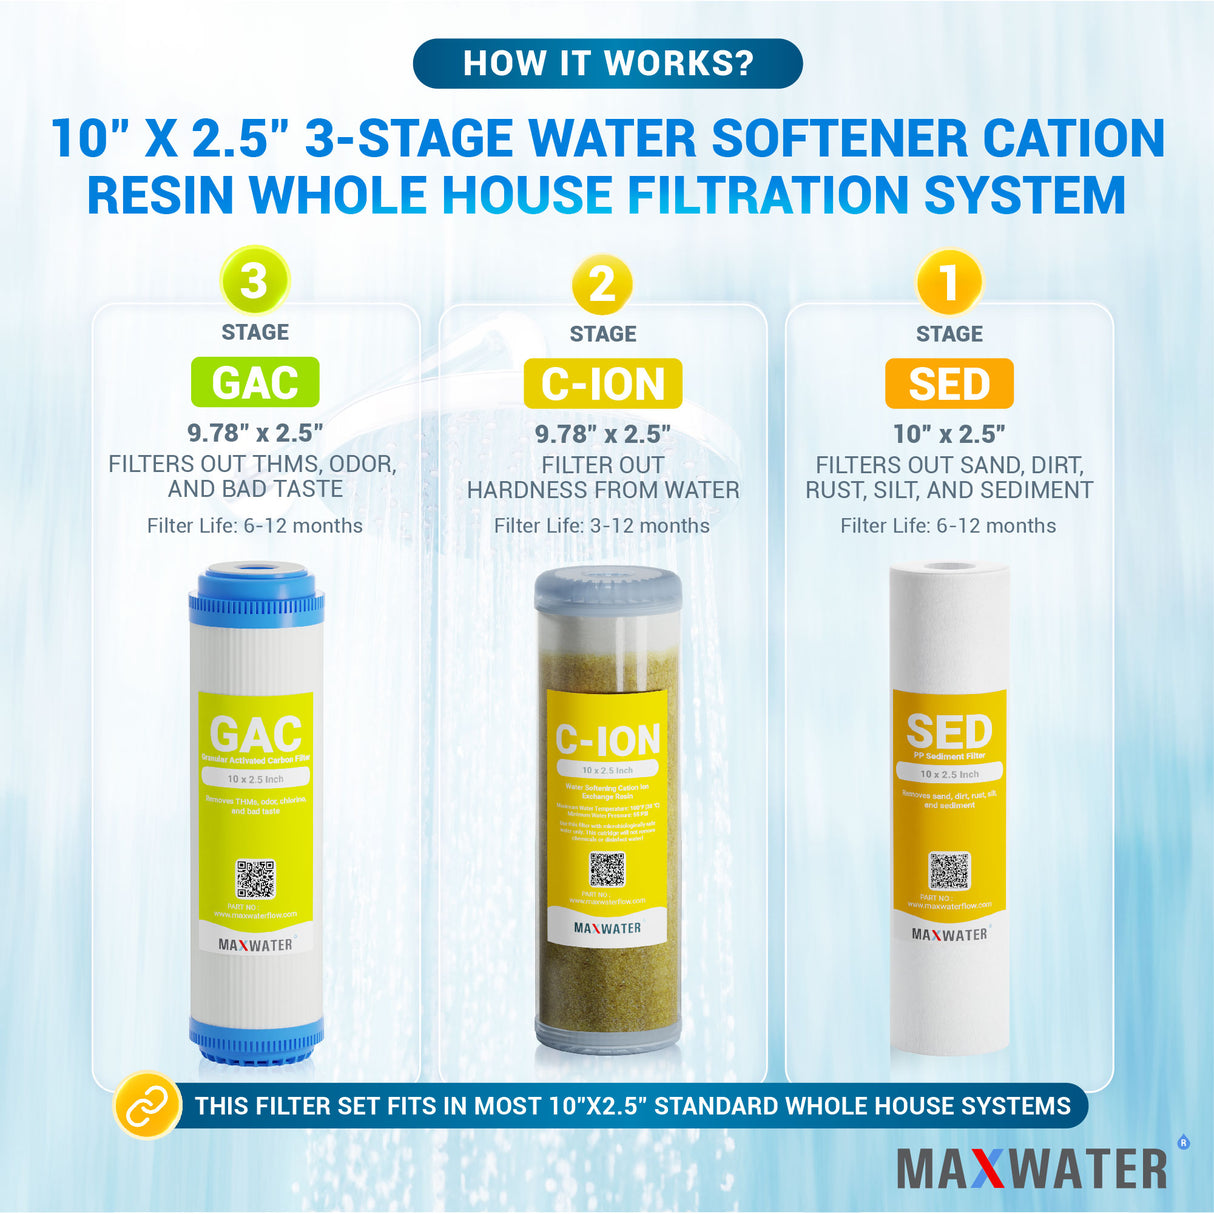 Efficient Water Softening System, 10” x 2.5" Size